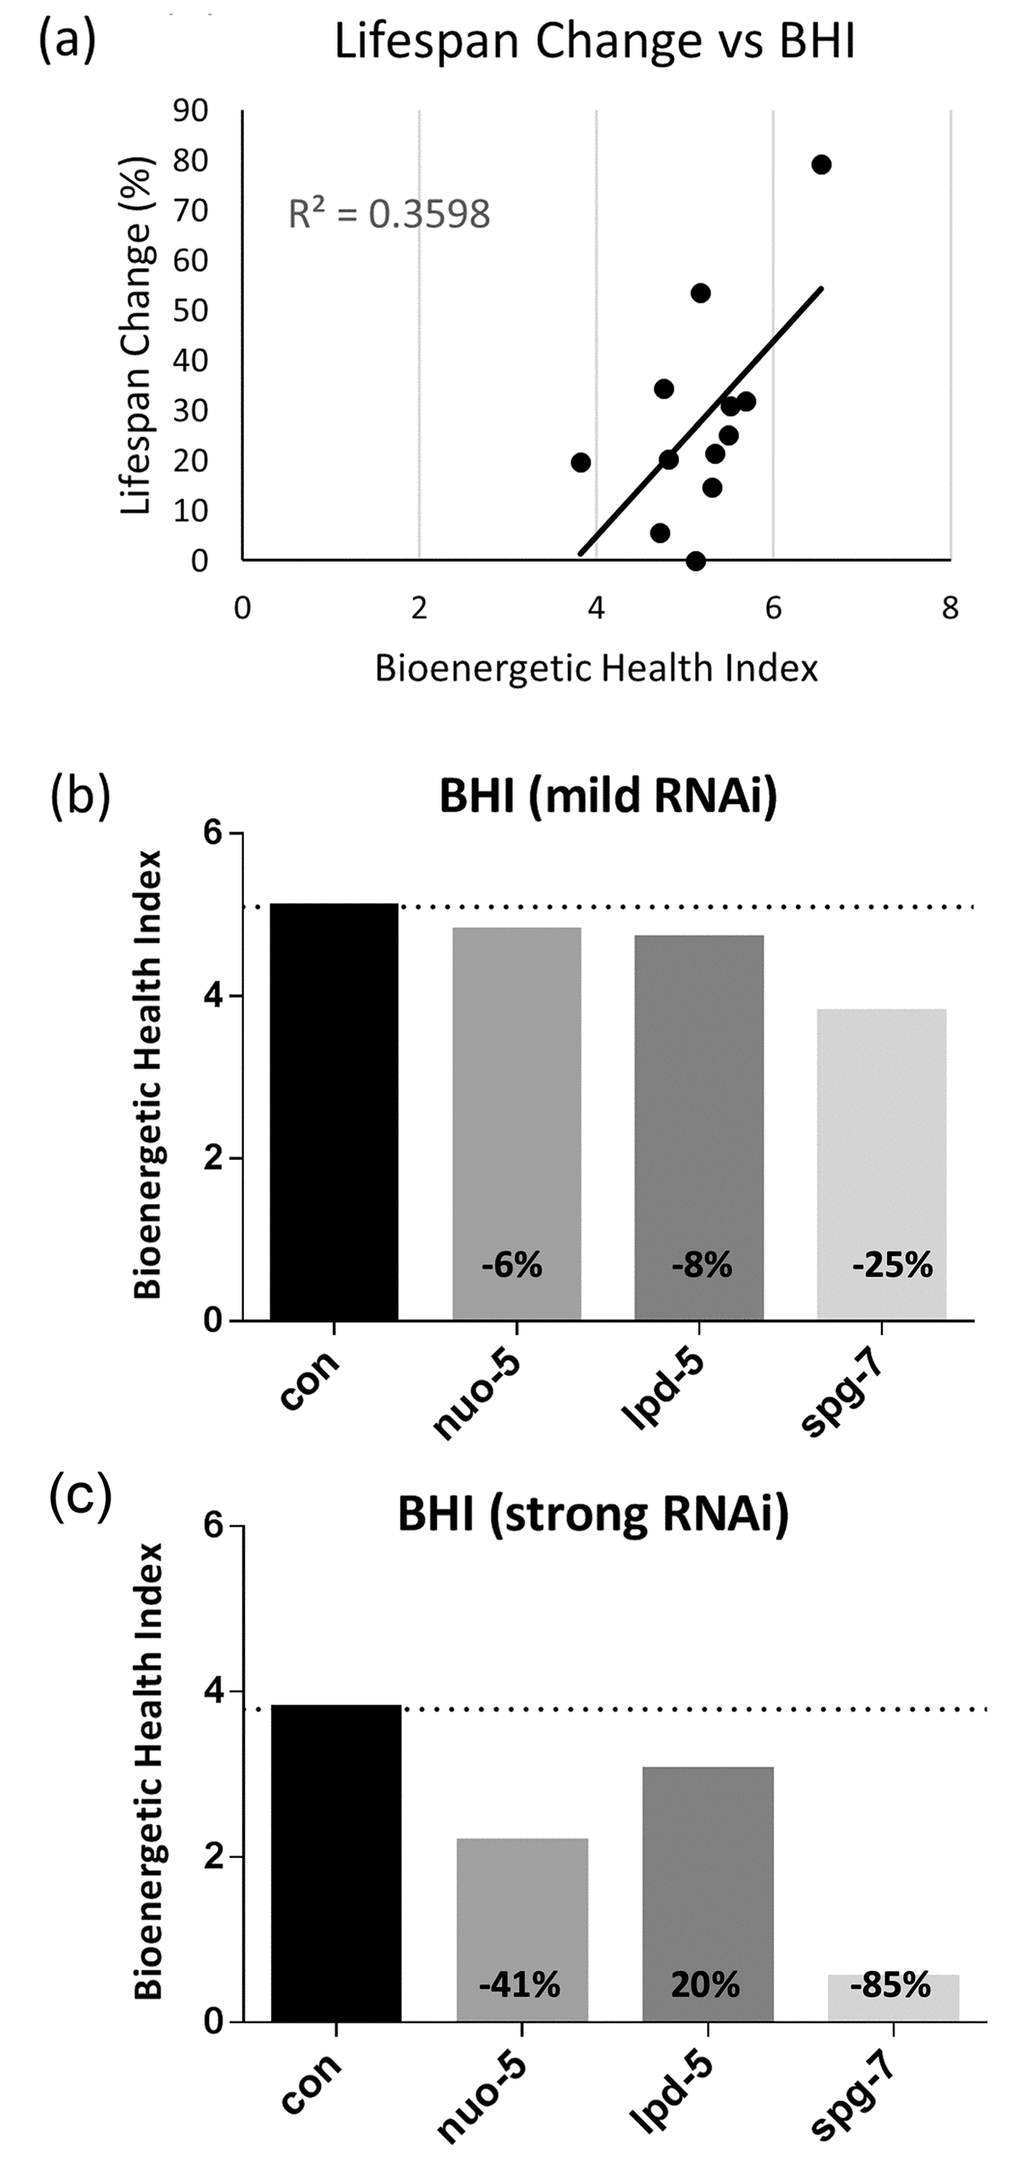 Bioenergetic Health Index (BHI) calculation and correlation with lifespan extension. BHI either (a) plotted against % increase in mean lifespan for all tested RNAi; or (b) calculated for mild (parental generation) and (c) strong (first generation) RNAi-mediated suppression of nuo-5, lpd-5 and spg-7. % decrease of BHI compared to control is shown on the corresponding bar.